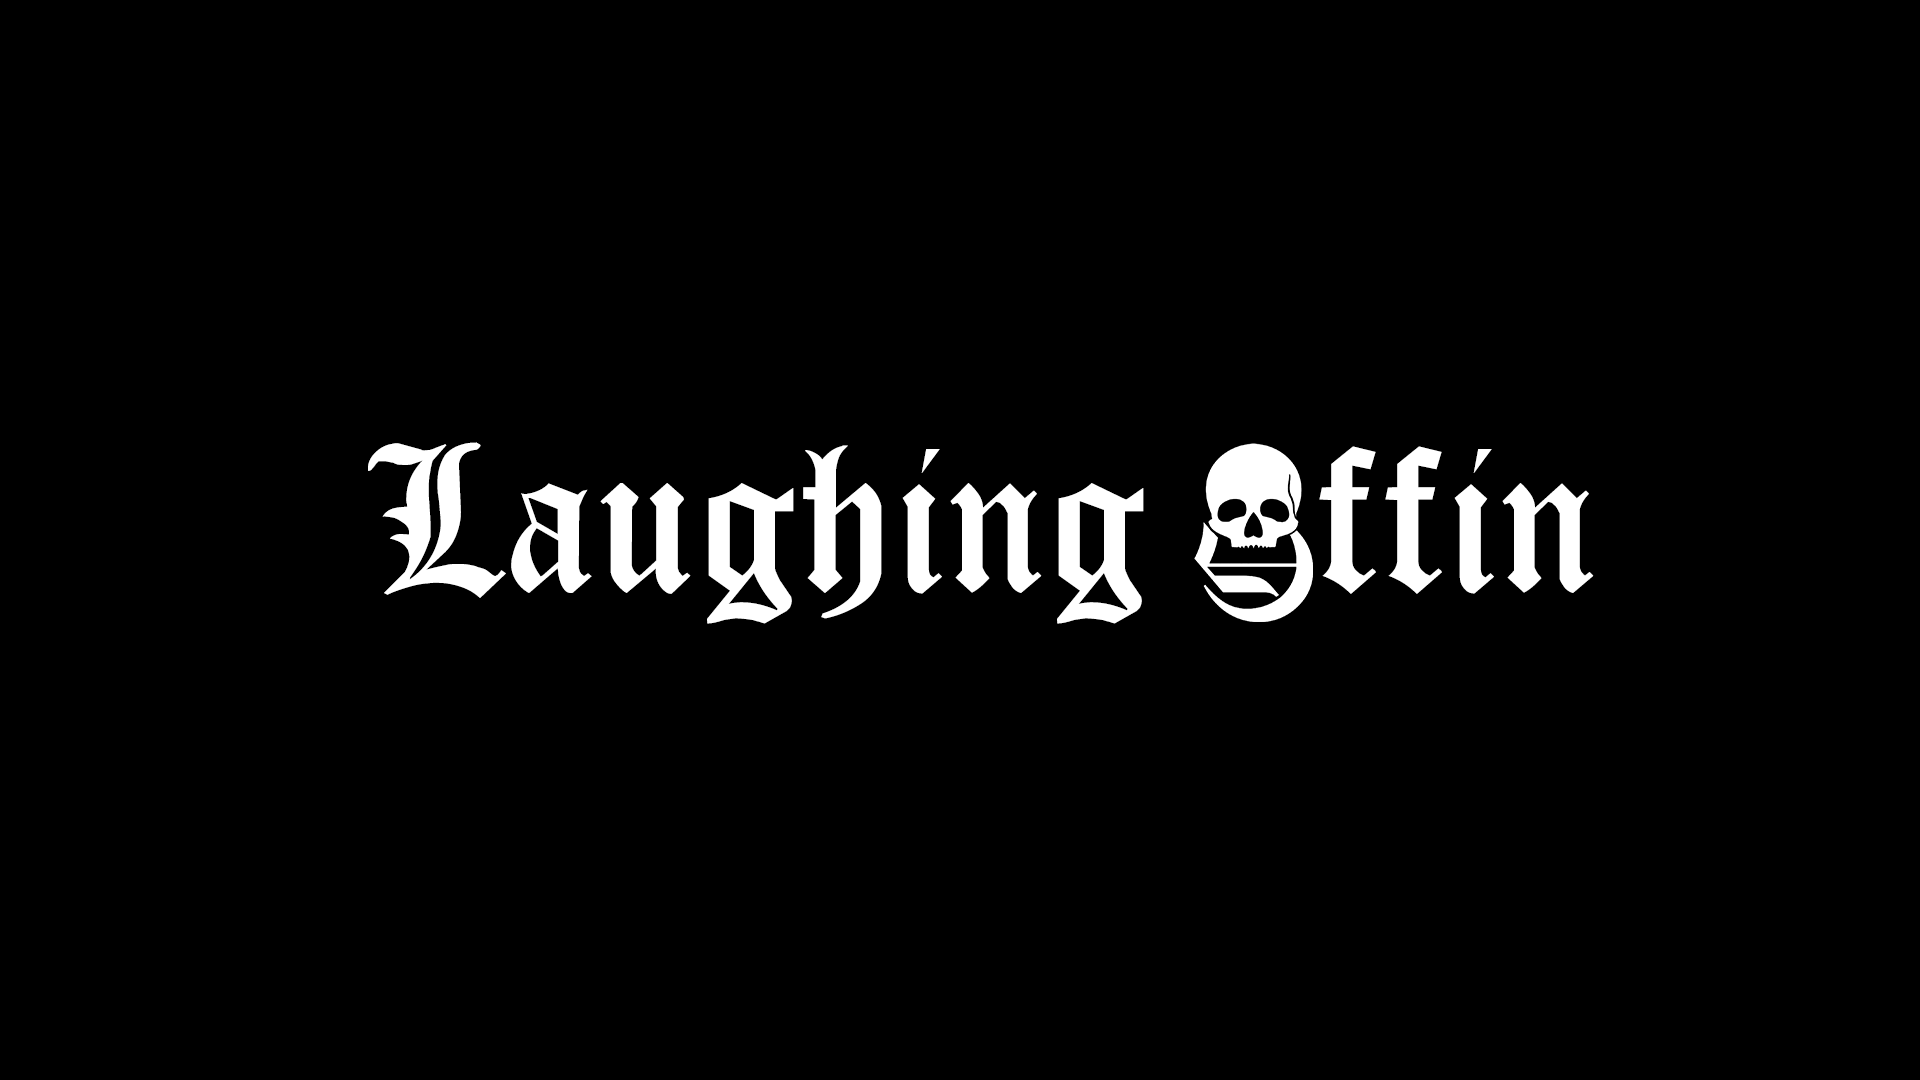 Laughing Coffin LC Lettering White. Lettering, Laugh, Coffin